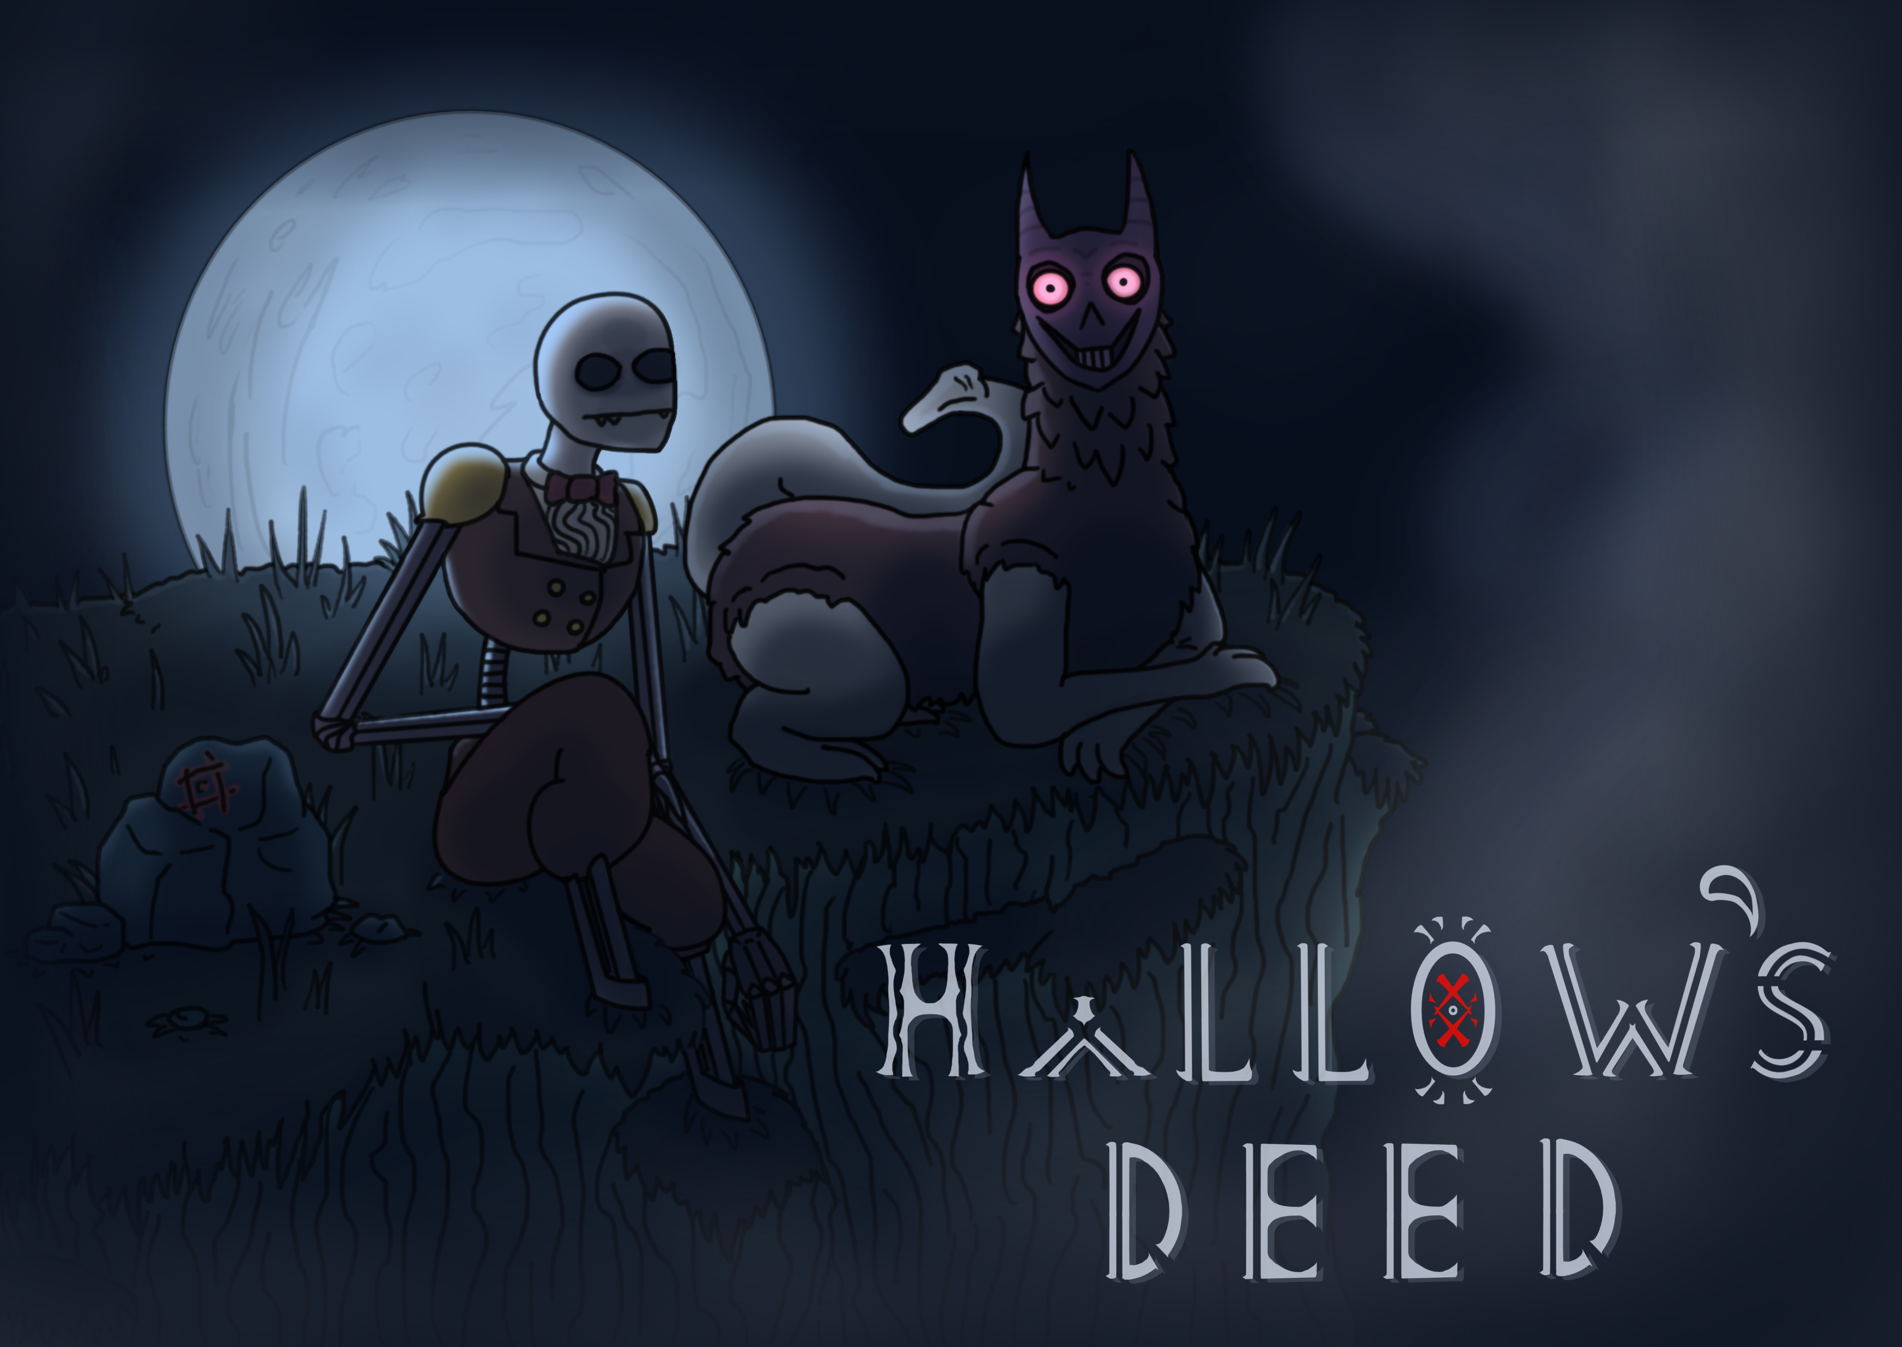 Hallows Deed -Chapter one-